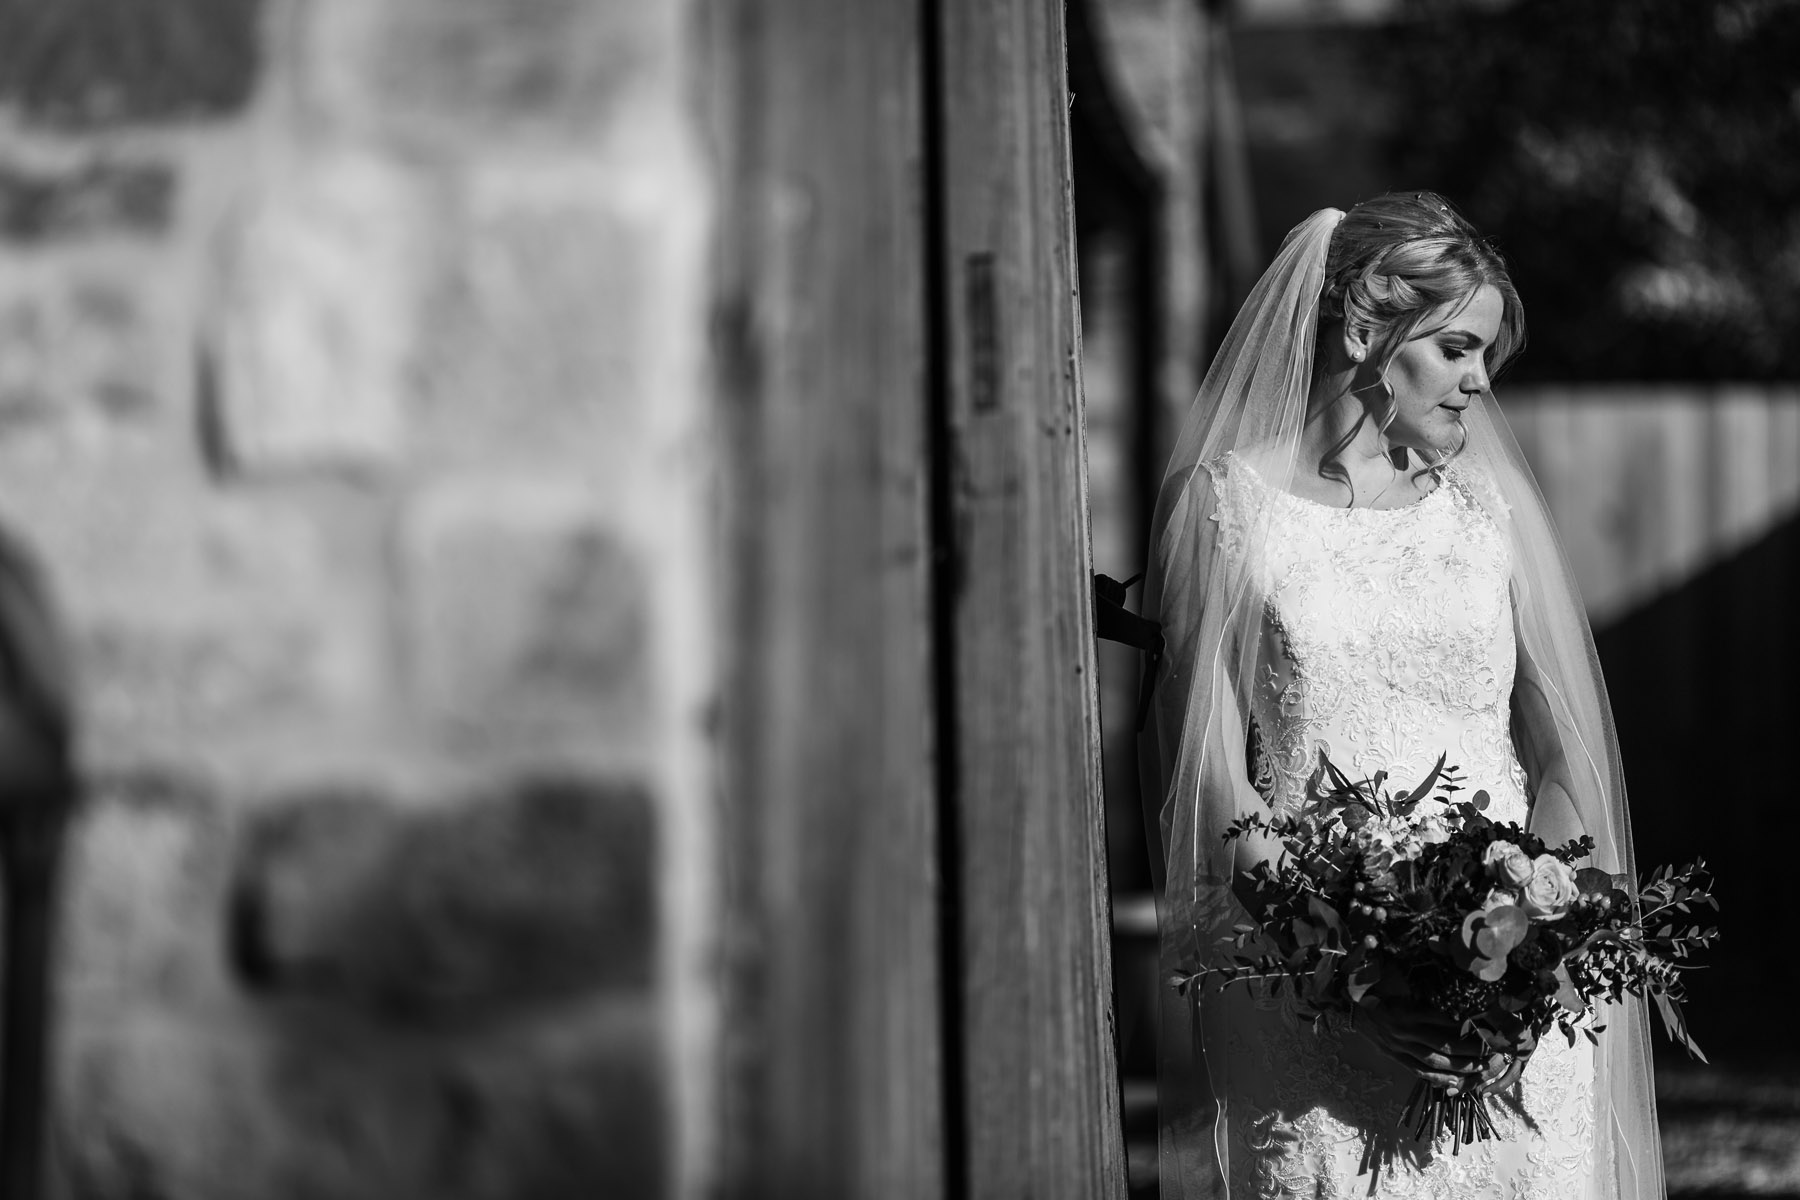 Theresa + Mark's German/British Autumn Infused Wedding at Blackwell Grange in the Cotswolds